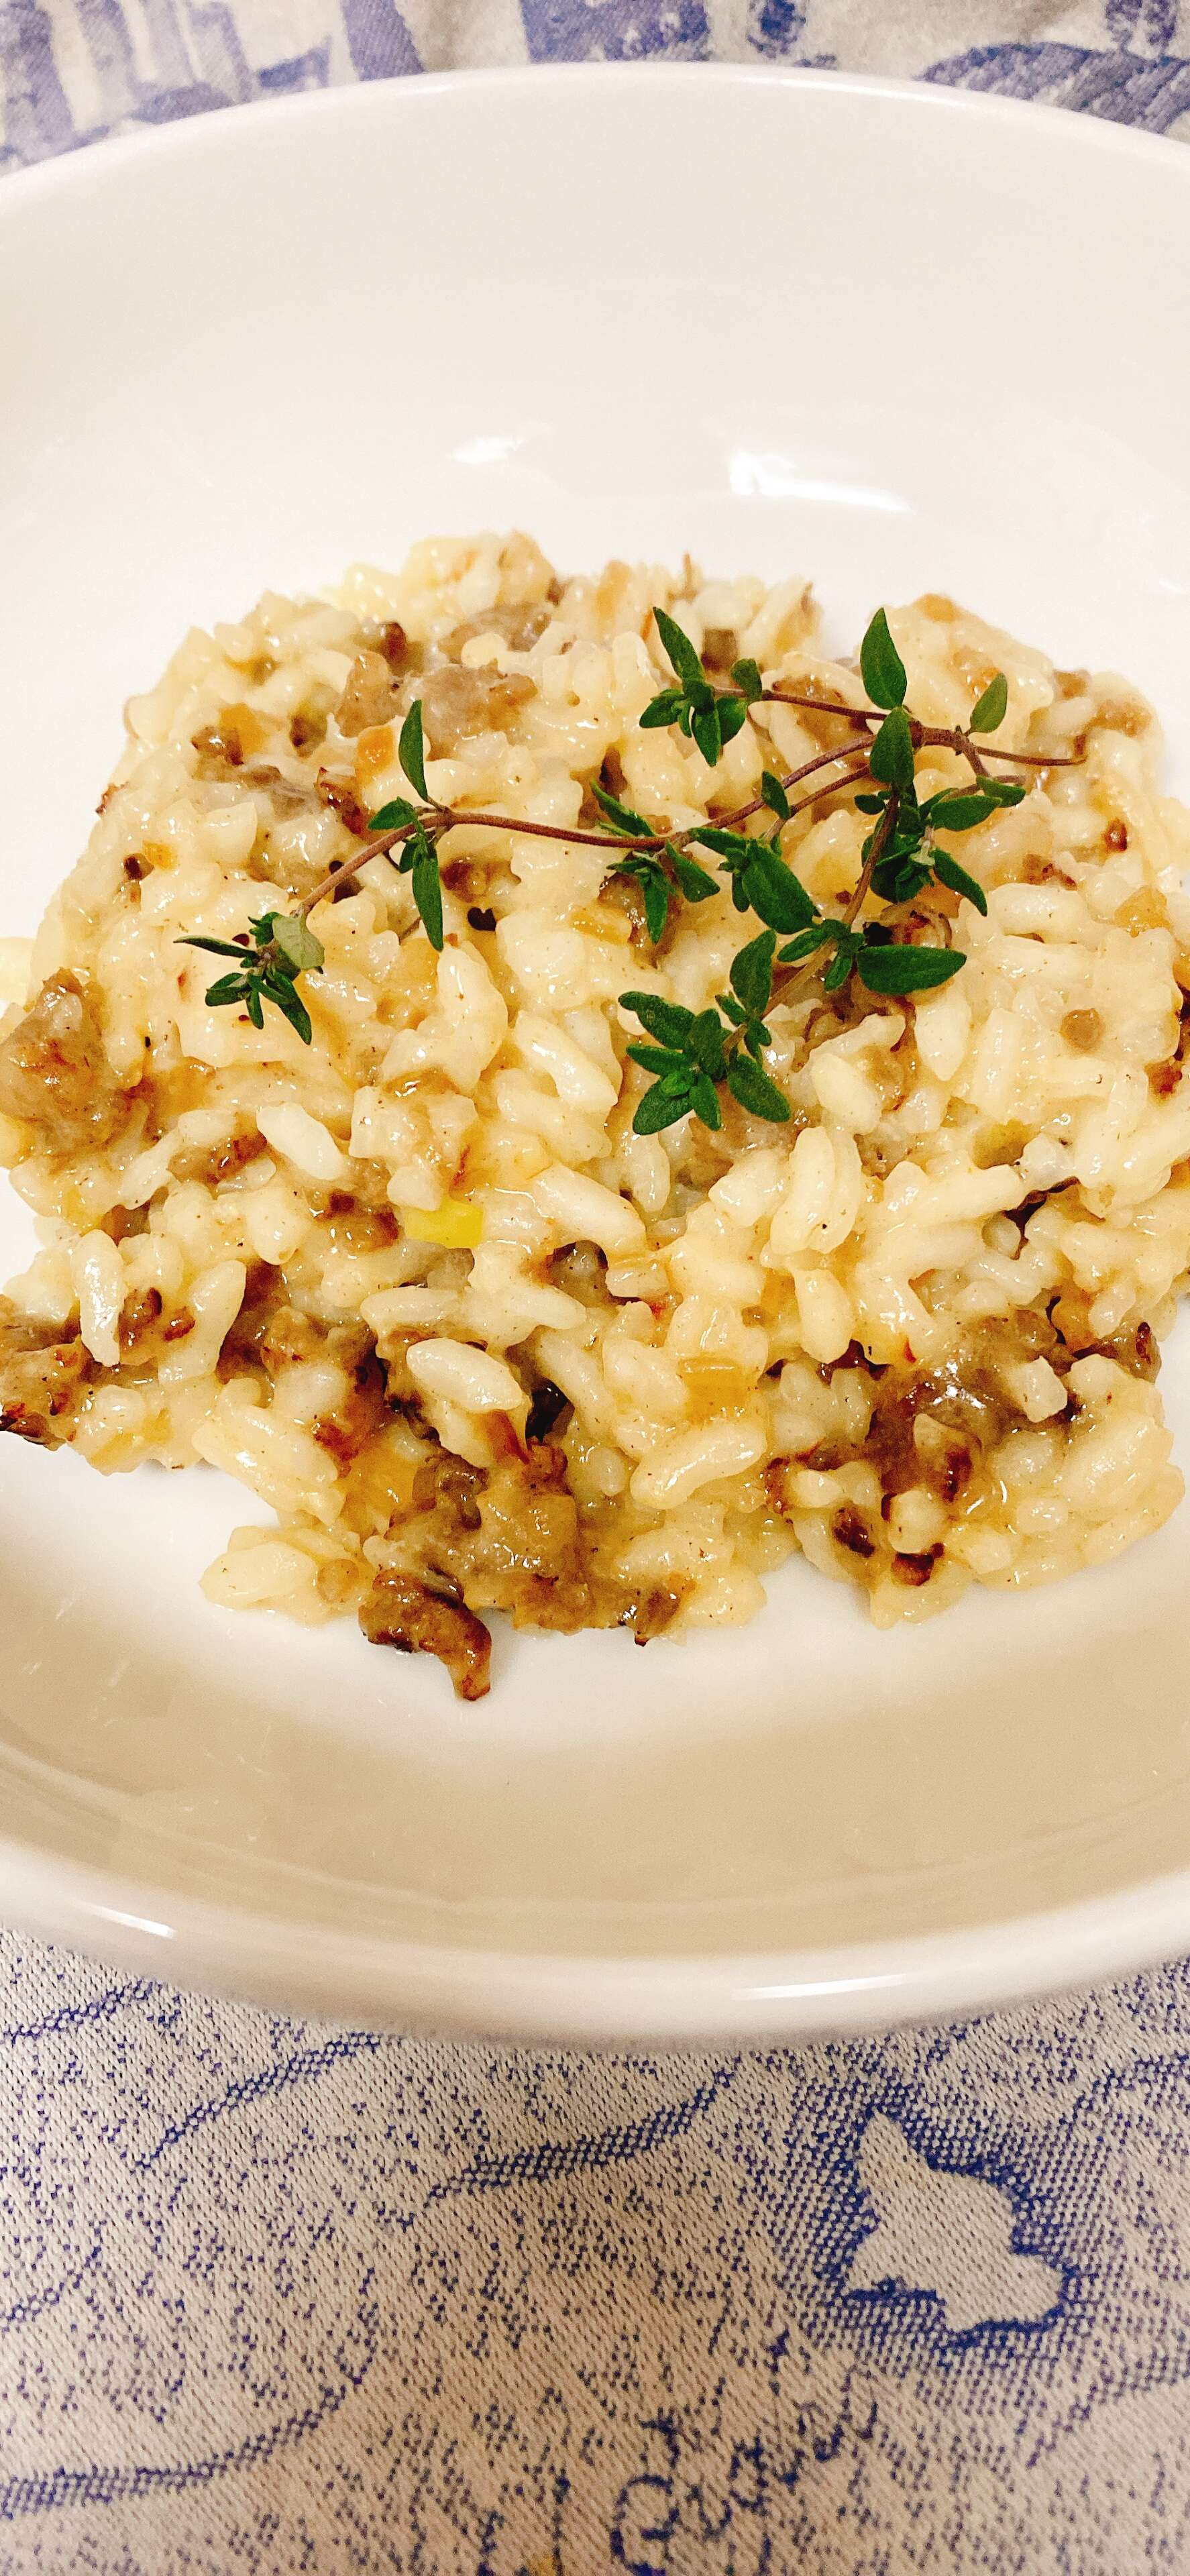 boundless game risotto